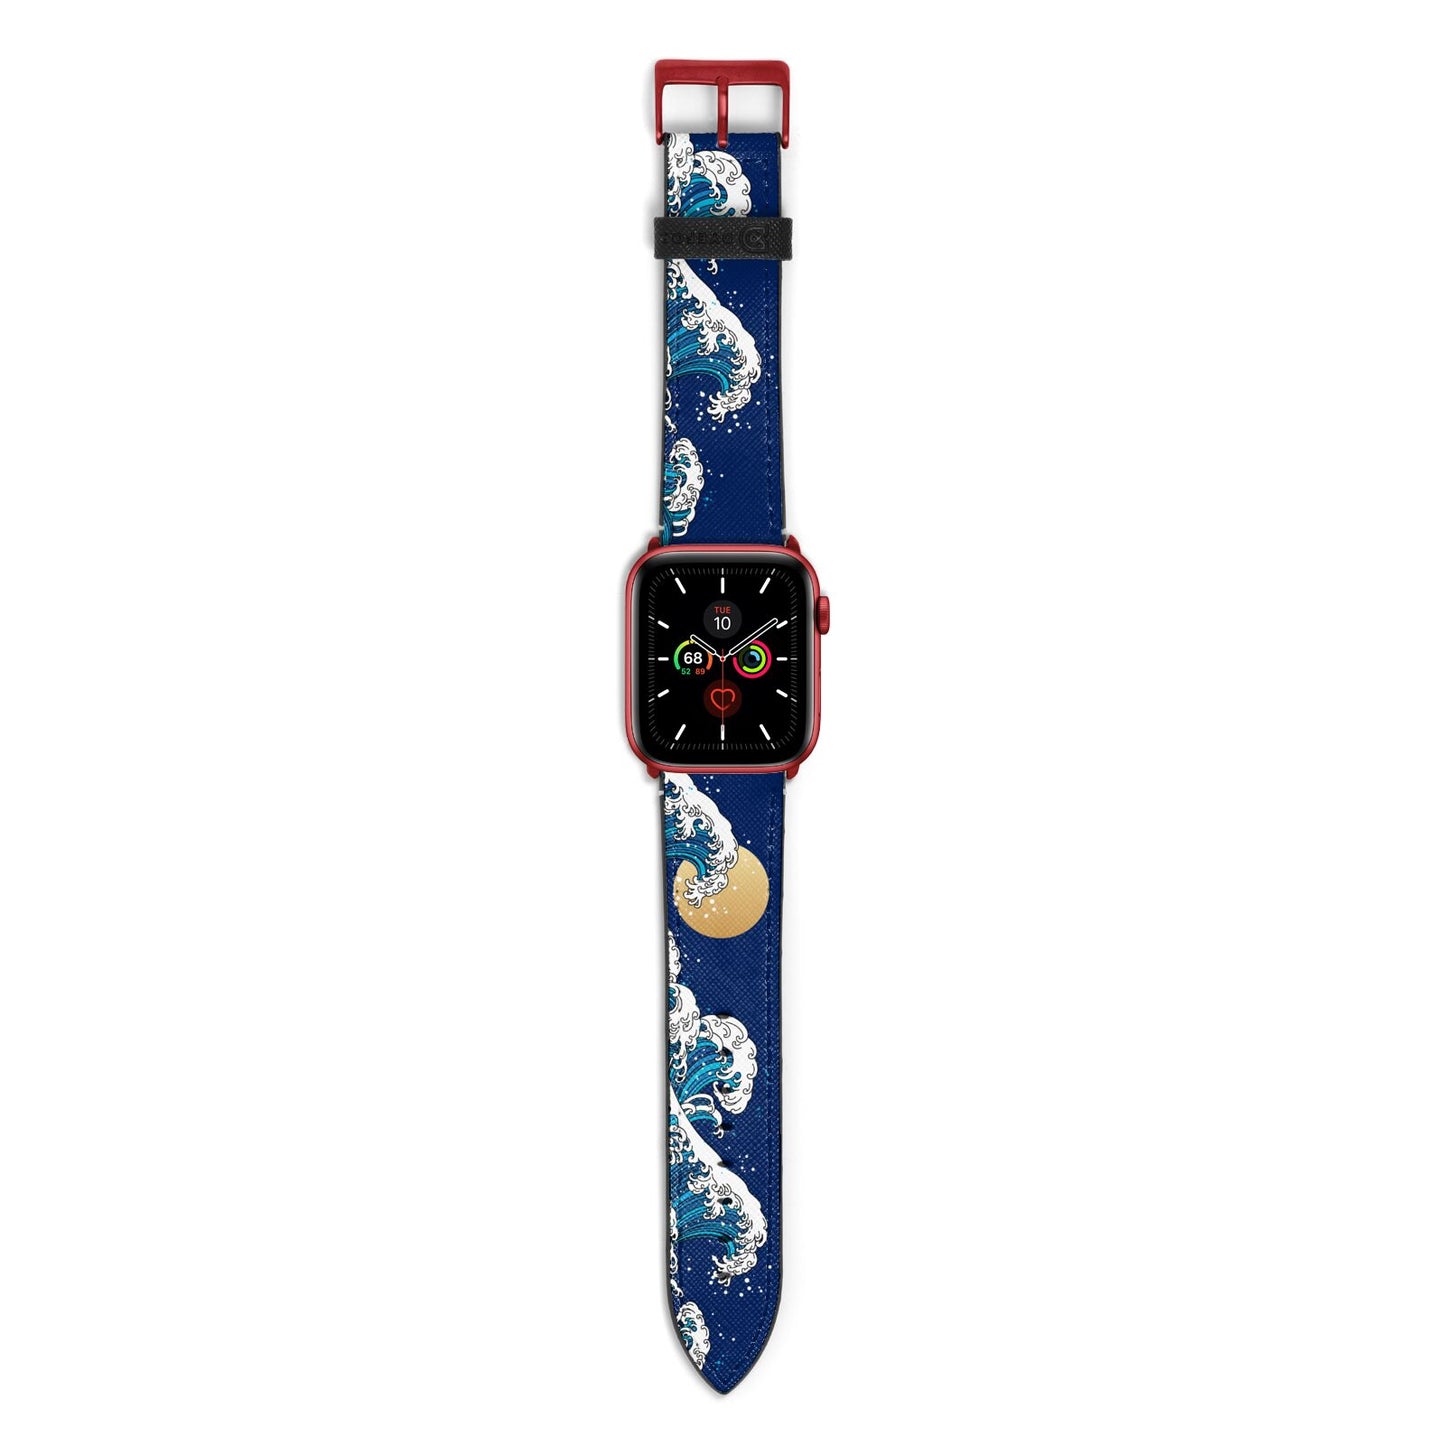 Hokusai Japanese Waves Apple Watch Strap with Red Hardware